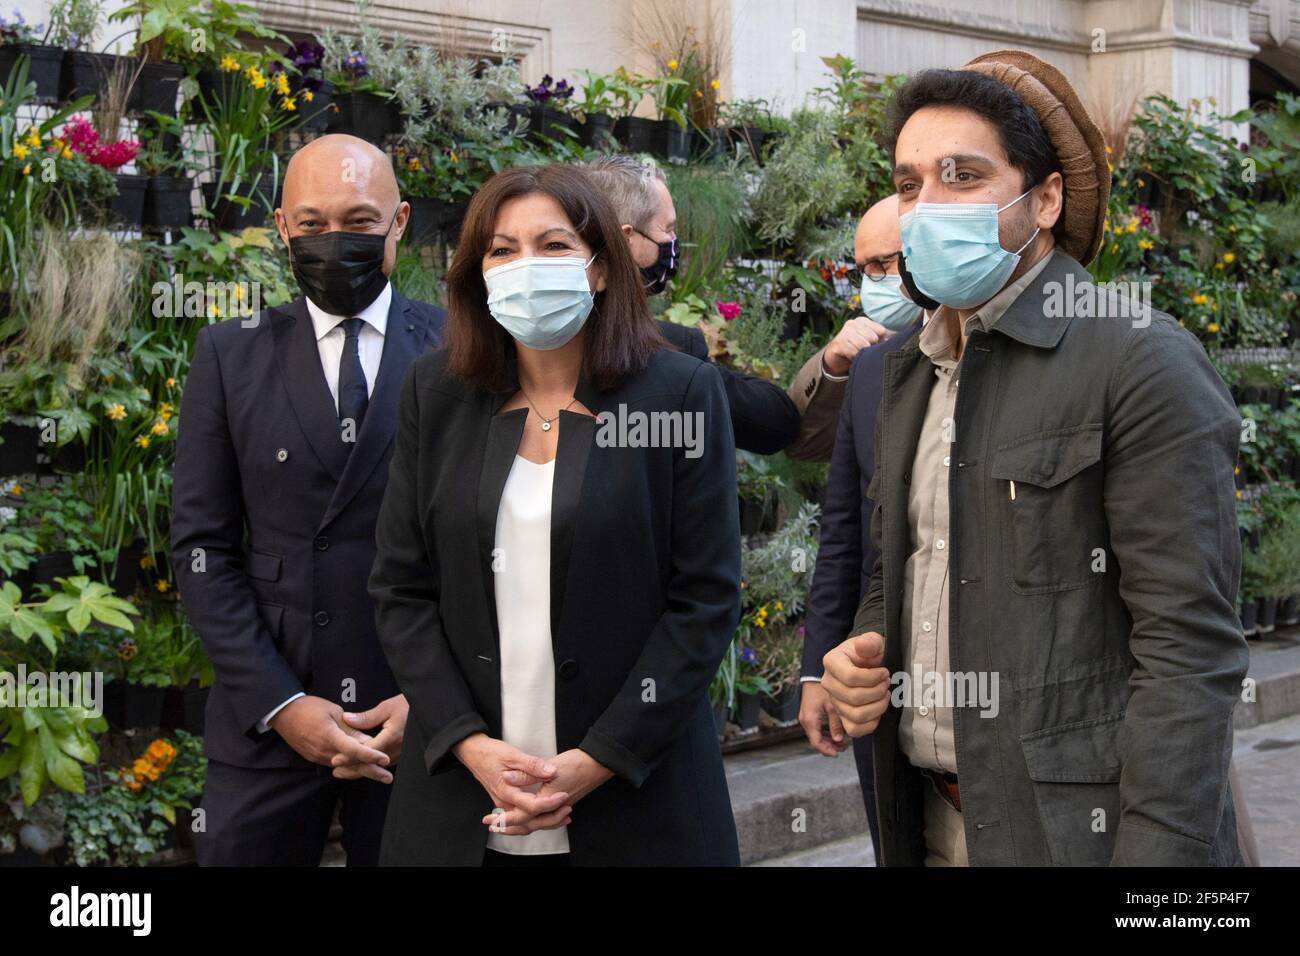 France 27th Mar 2021 Mayor Of Paris Anne Hidalgo Received Ahmad Massoud Son Of Late Afghan Commander Ahmad Shah Massoud At The Paris Town Hallparis France On March 27 2021 Photo By